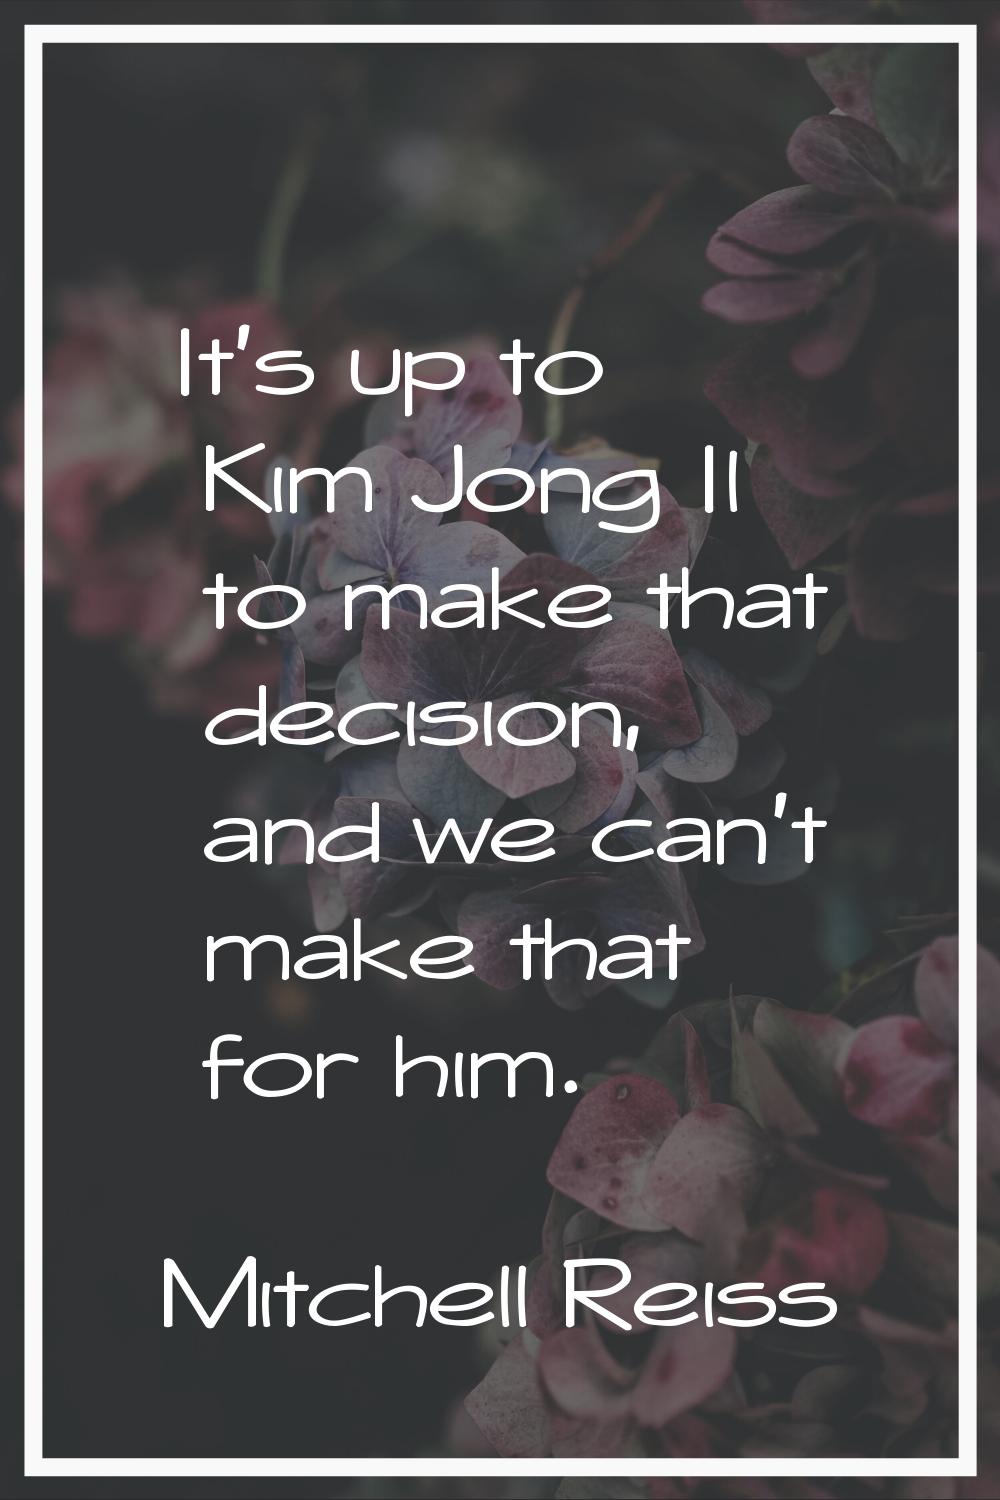 It's up to Kim Jong Il to make that decision, and we can't make that for him.